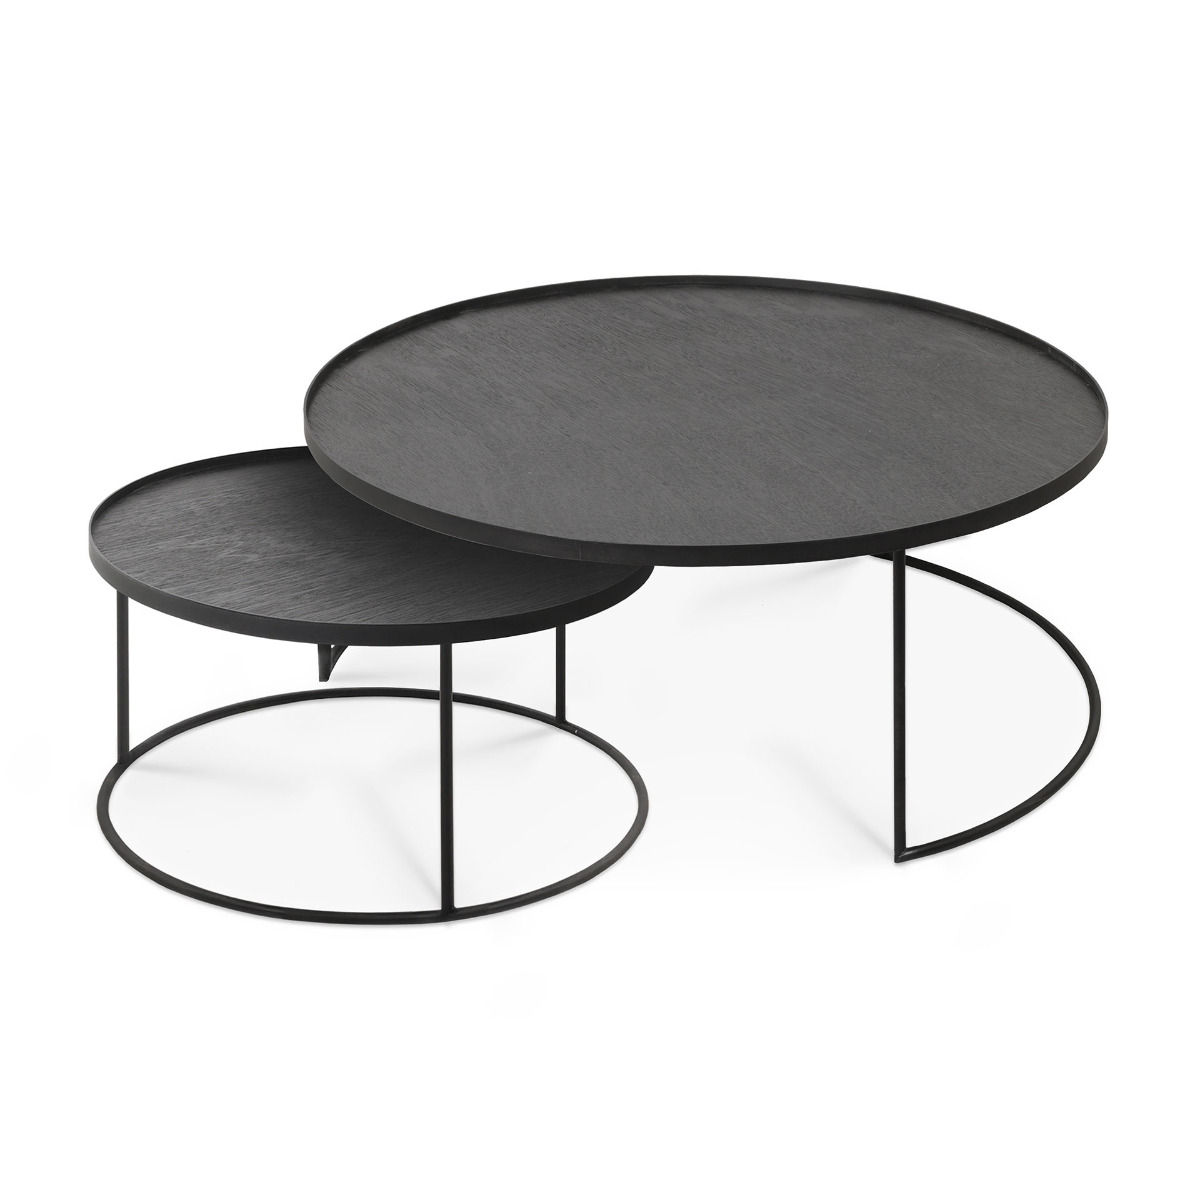 Round tray coffee table set of 2